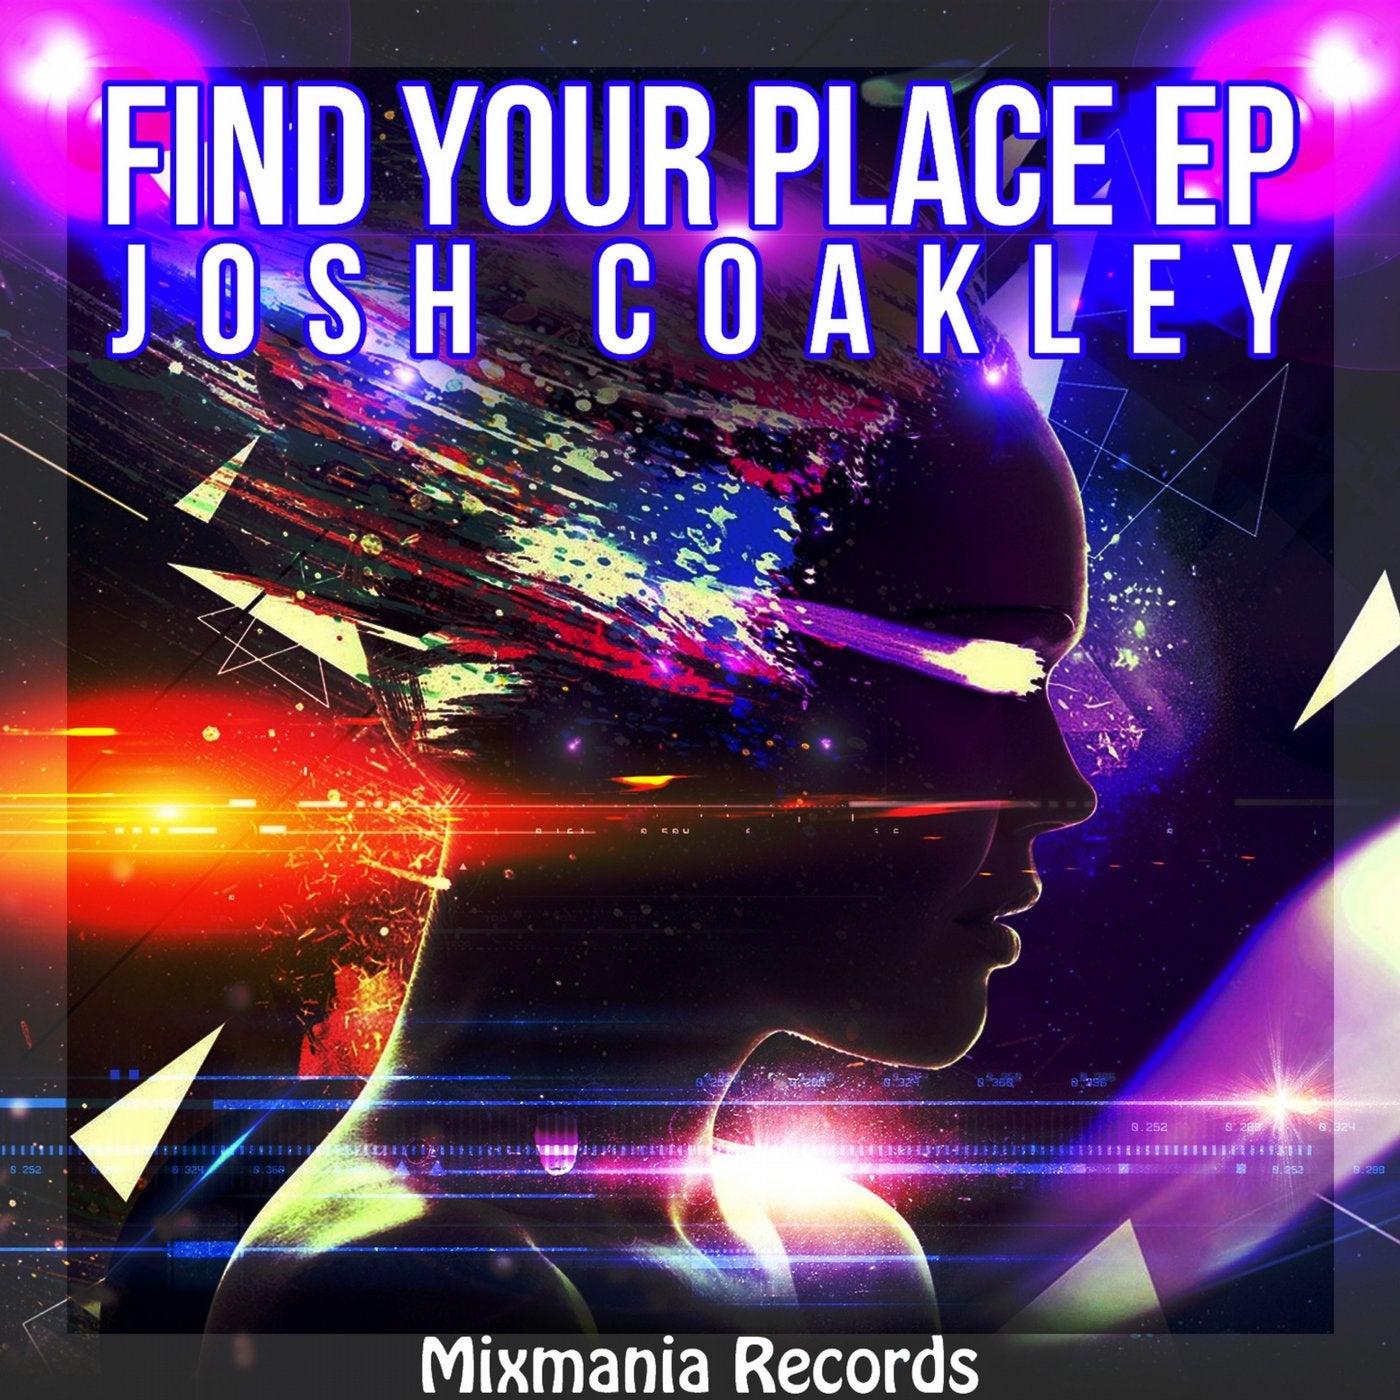 Find Your Place EP